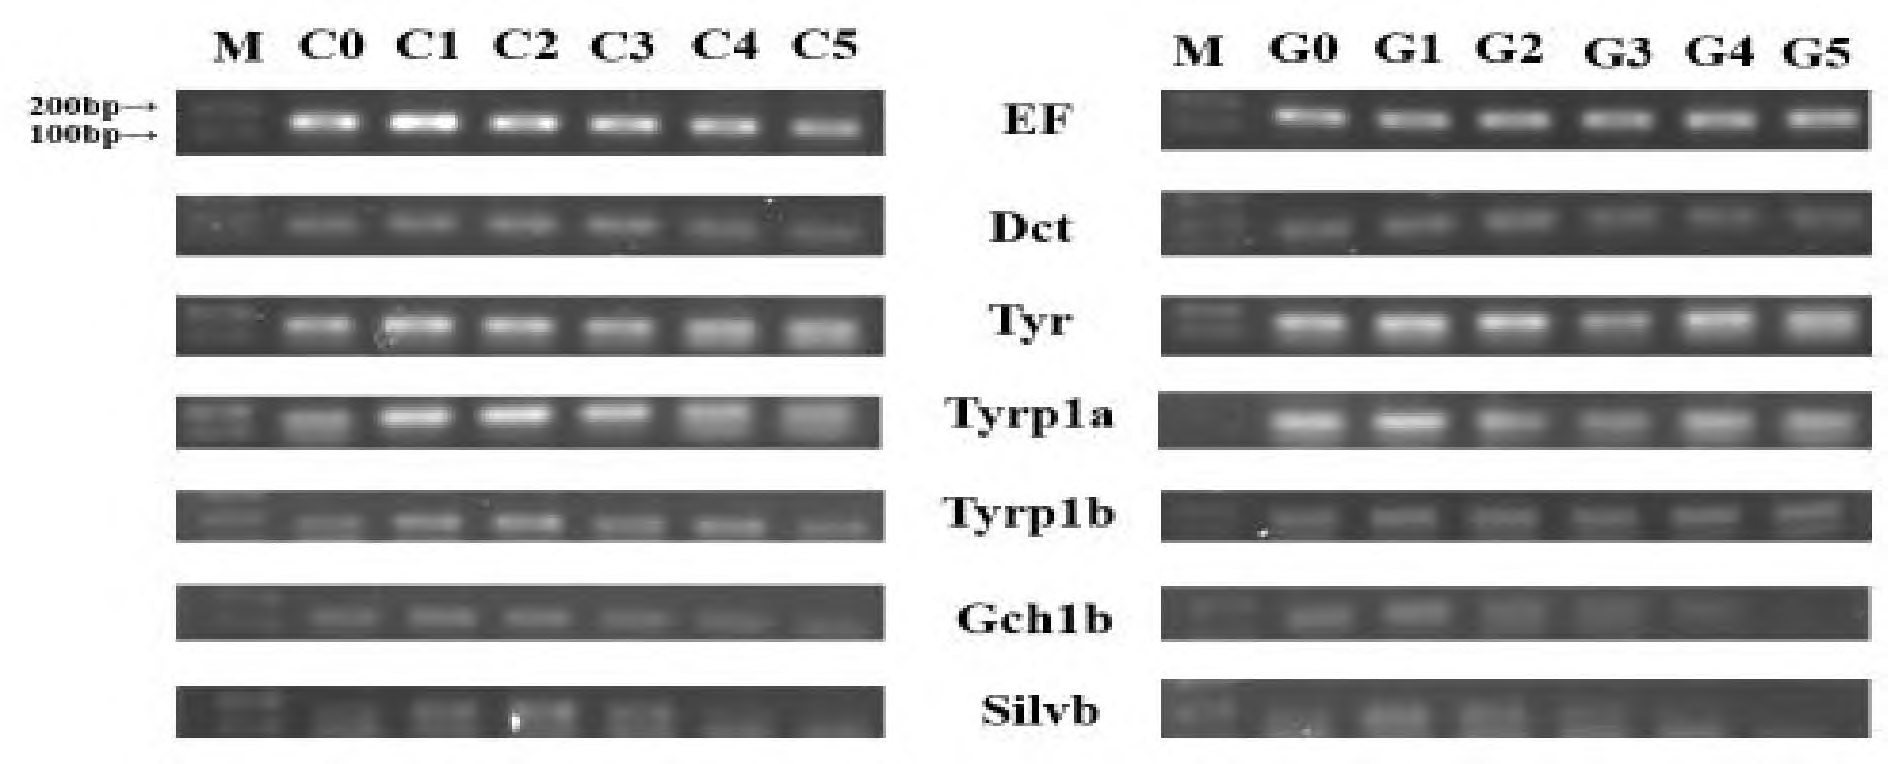 RT-PCR from immediately after hatching (C0 and G0) to 5 days after hatching (C5 and G5) in the loach control and albino groups